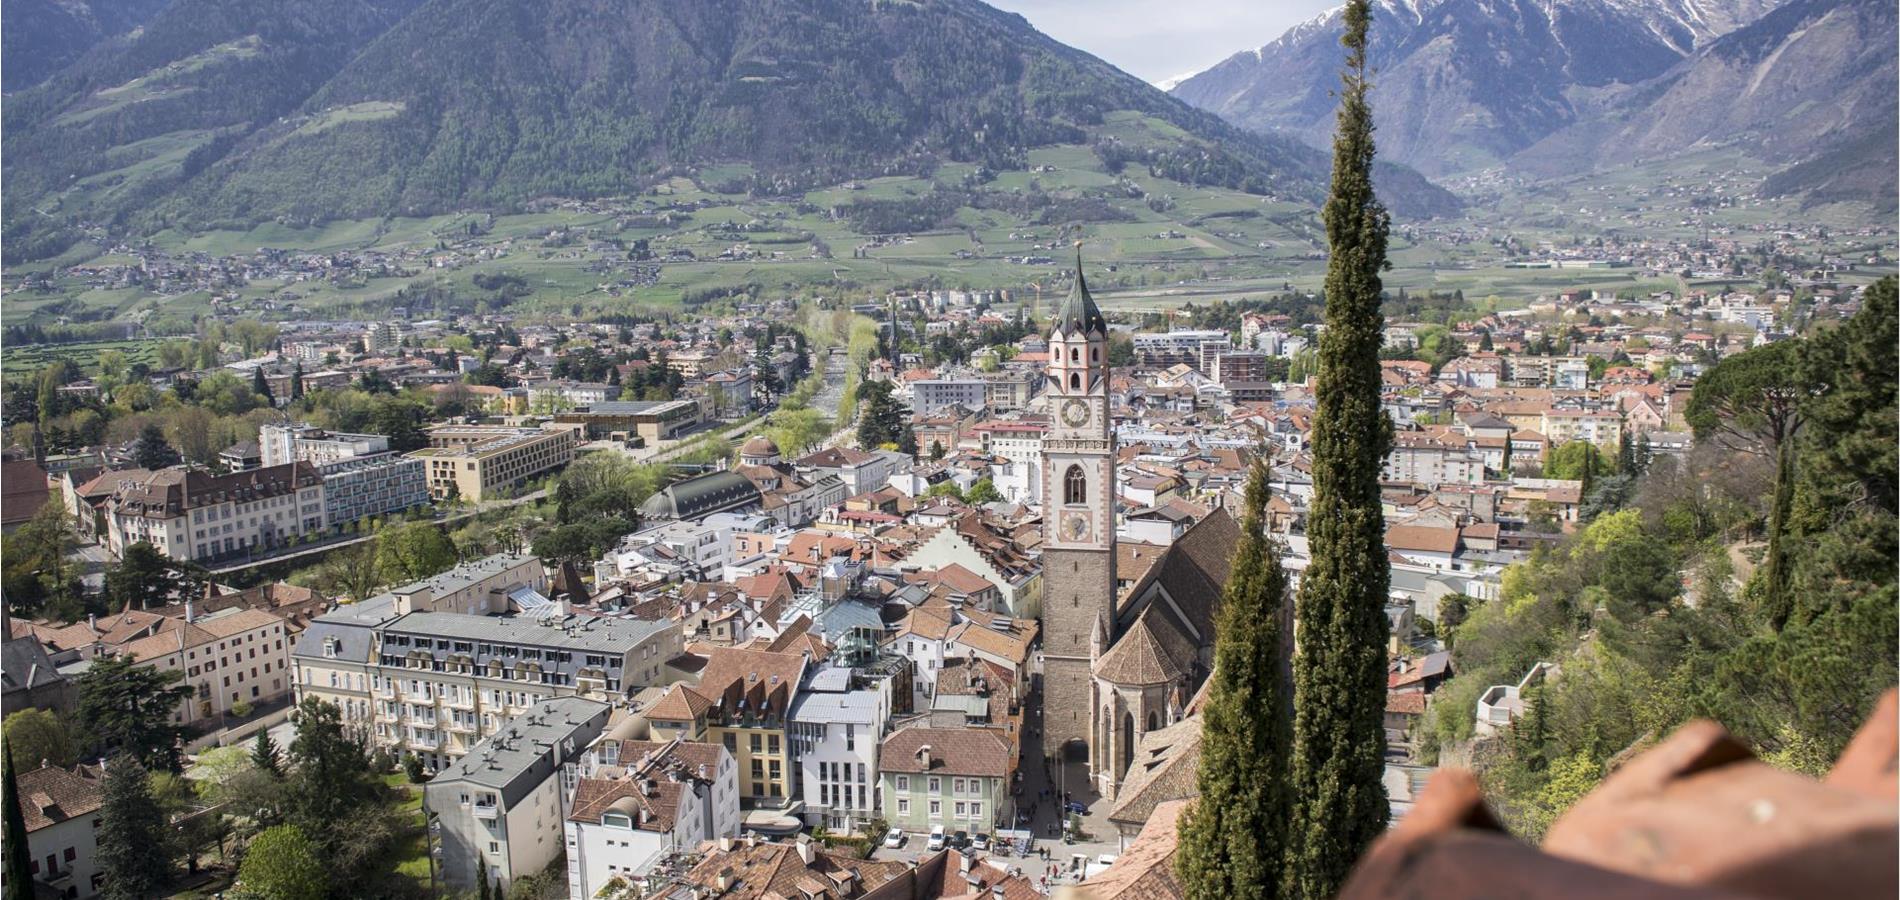 Spa Town of Merano